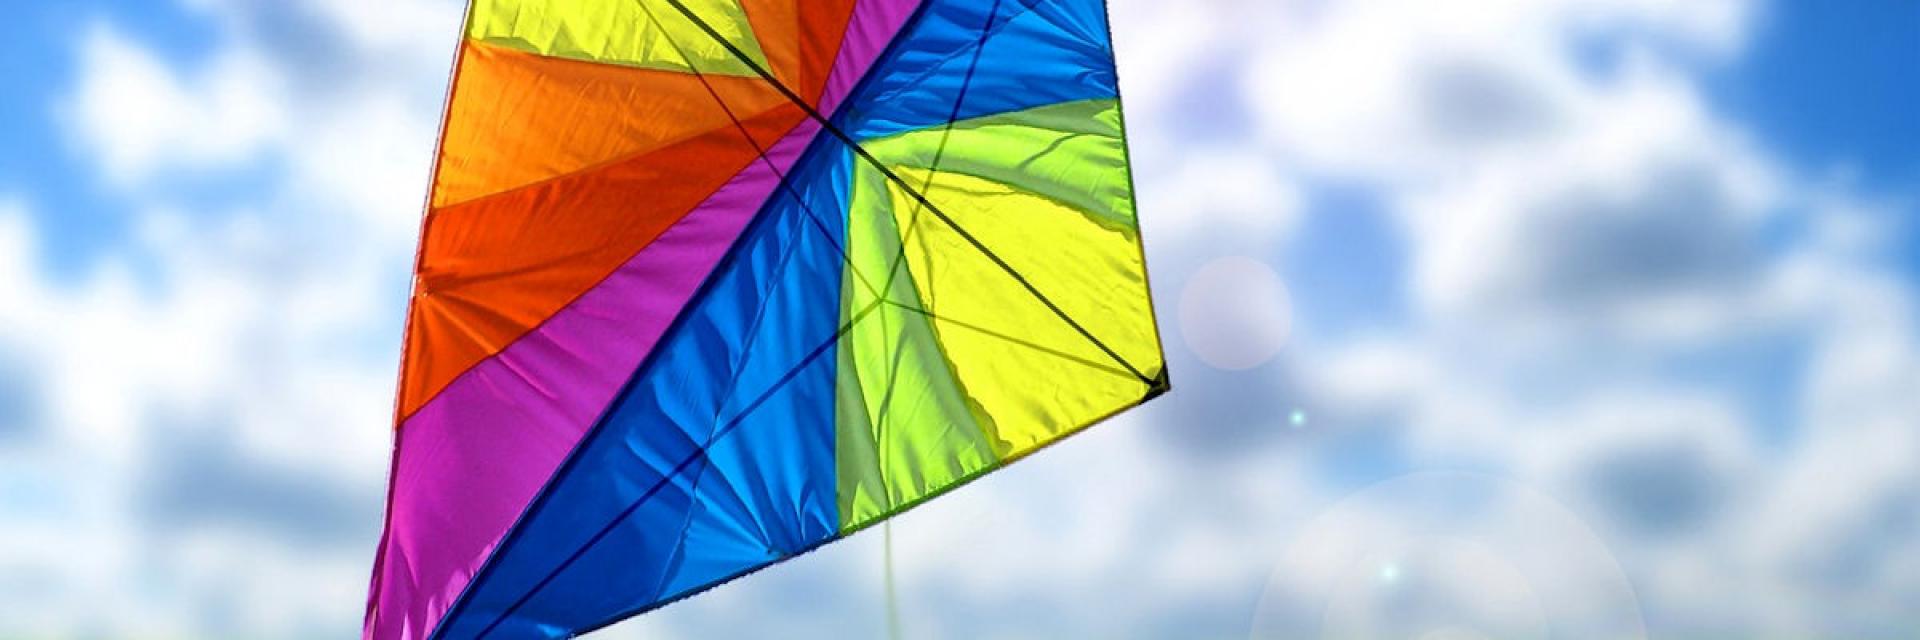 Let’s save the kites!